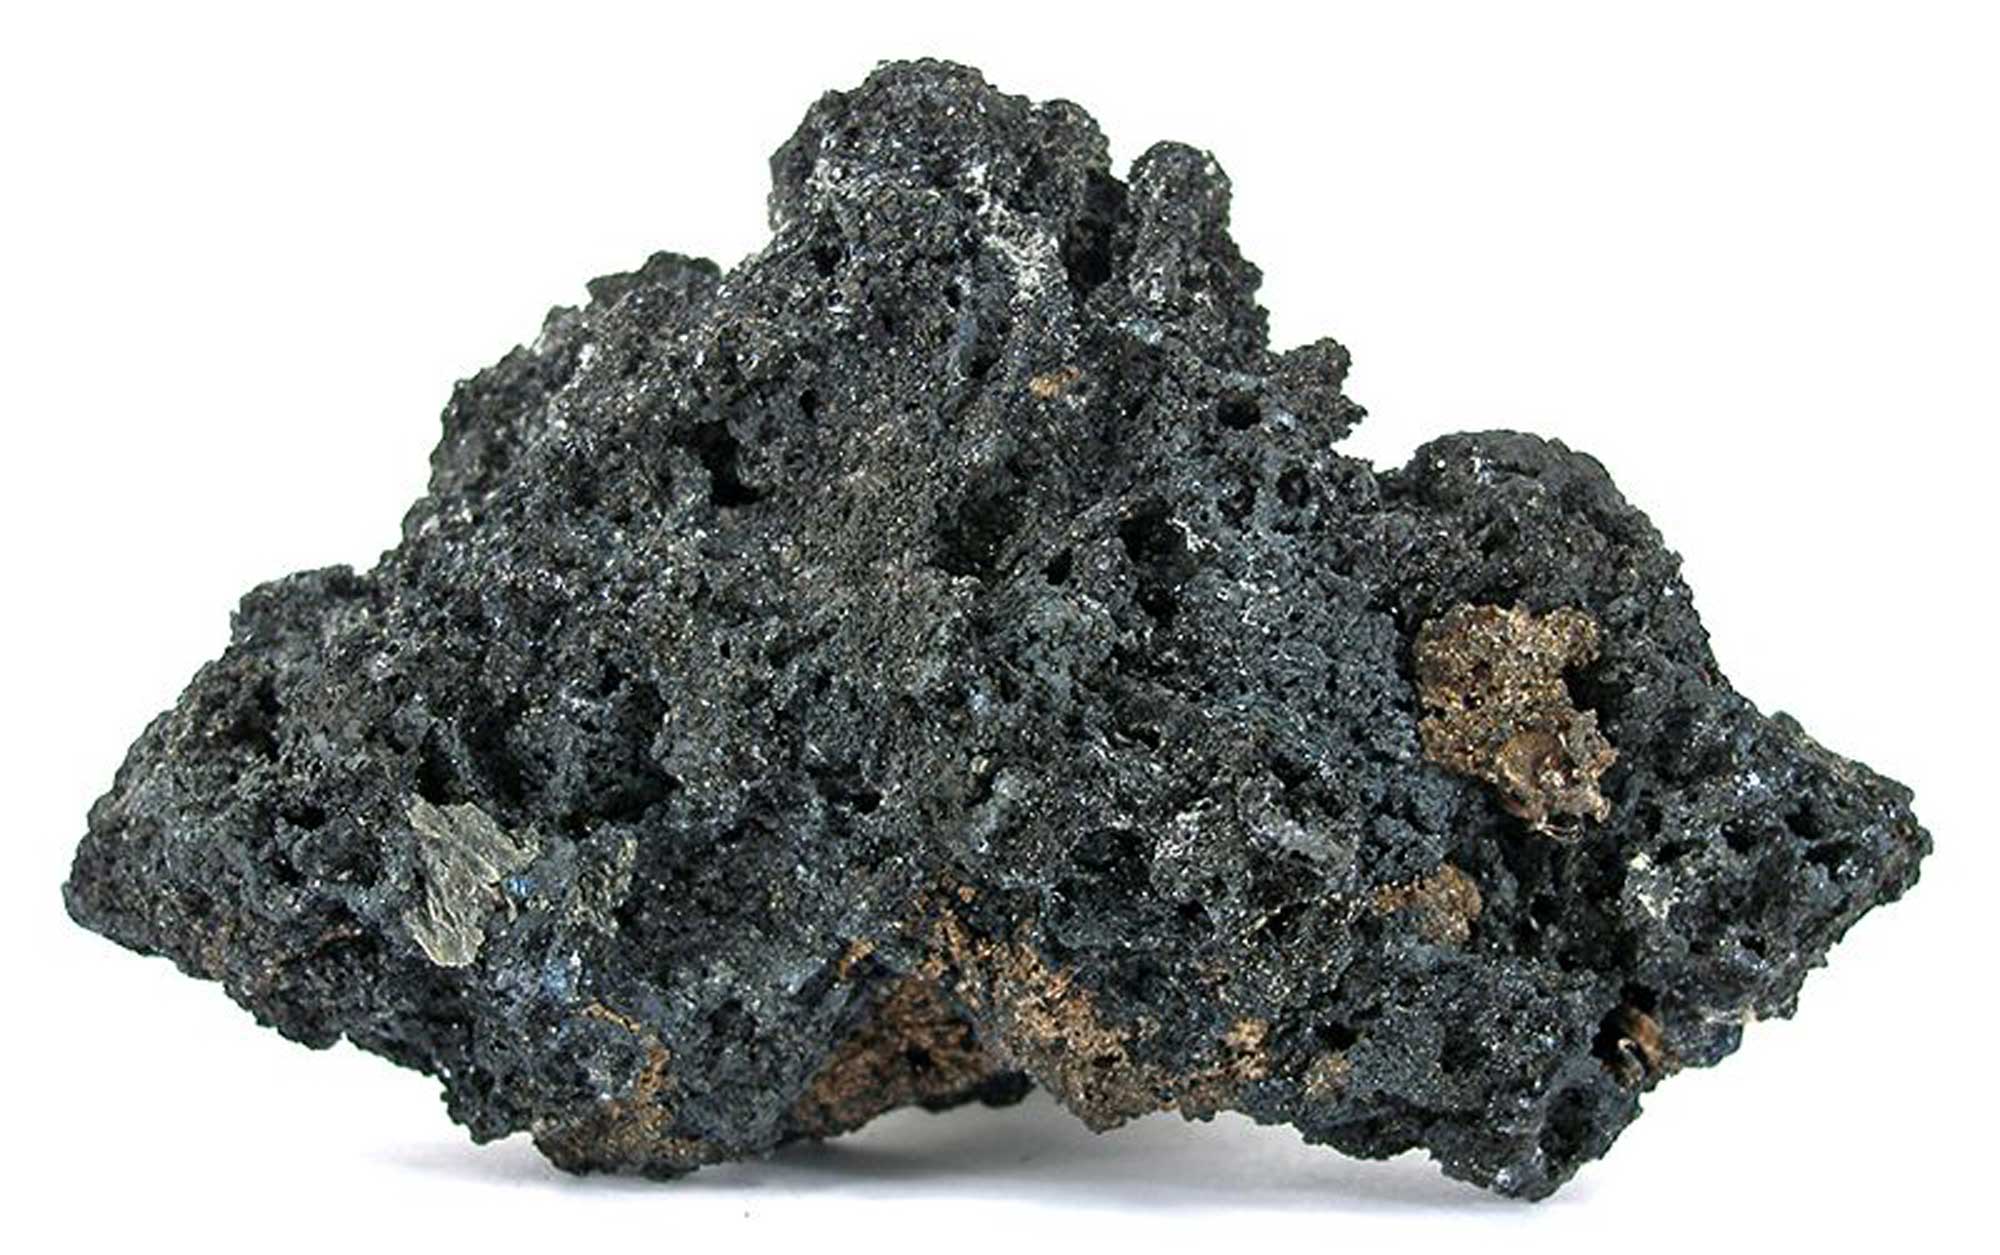 Photograph of a sample of lead-rich ore with patches of silver from the Silver Hill Mine, North Carolina.